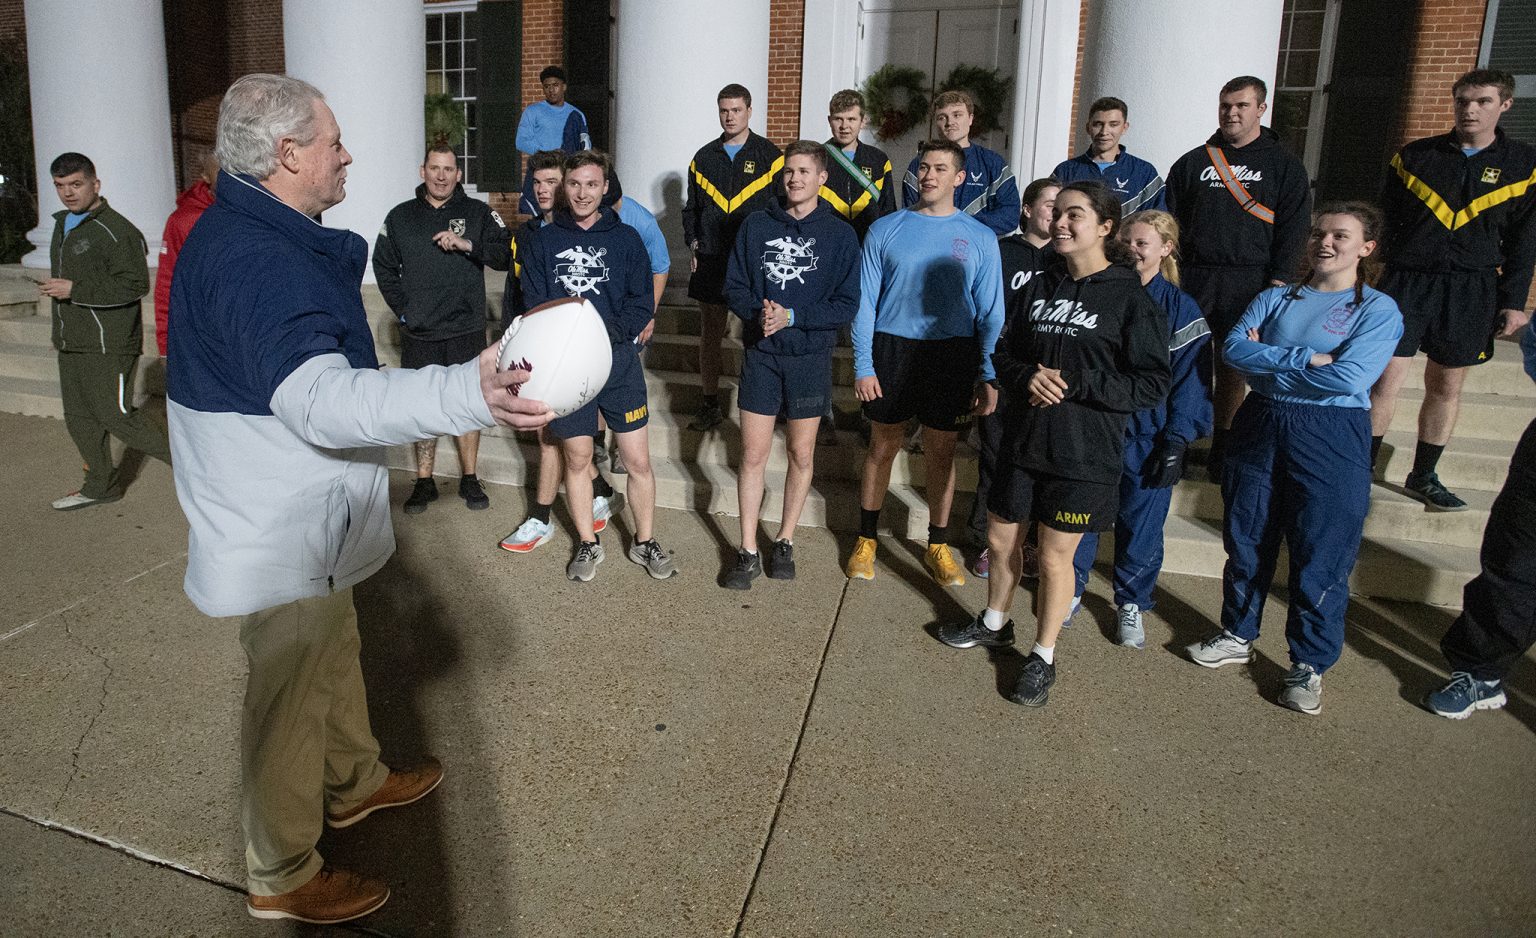 Chancellor Glenn Boyce (left) accepts the game ball from Ole Miss Magnolia Battalion cadets after the 2022 Egg Bowl Run. Each year, cadets from Ole Miss and Mississippi State University leg the game ball nearly 100 miles across north Mississippi. Photo by Thomas Graning/Ole Miss Digital Imaging Services